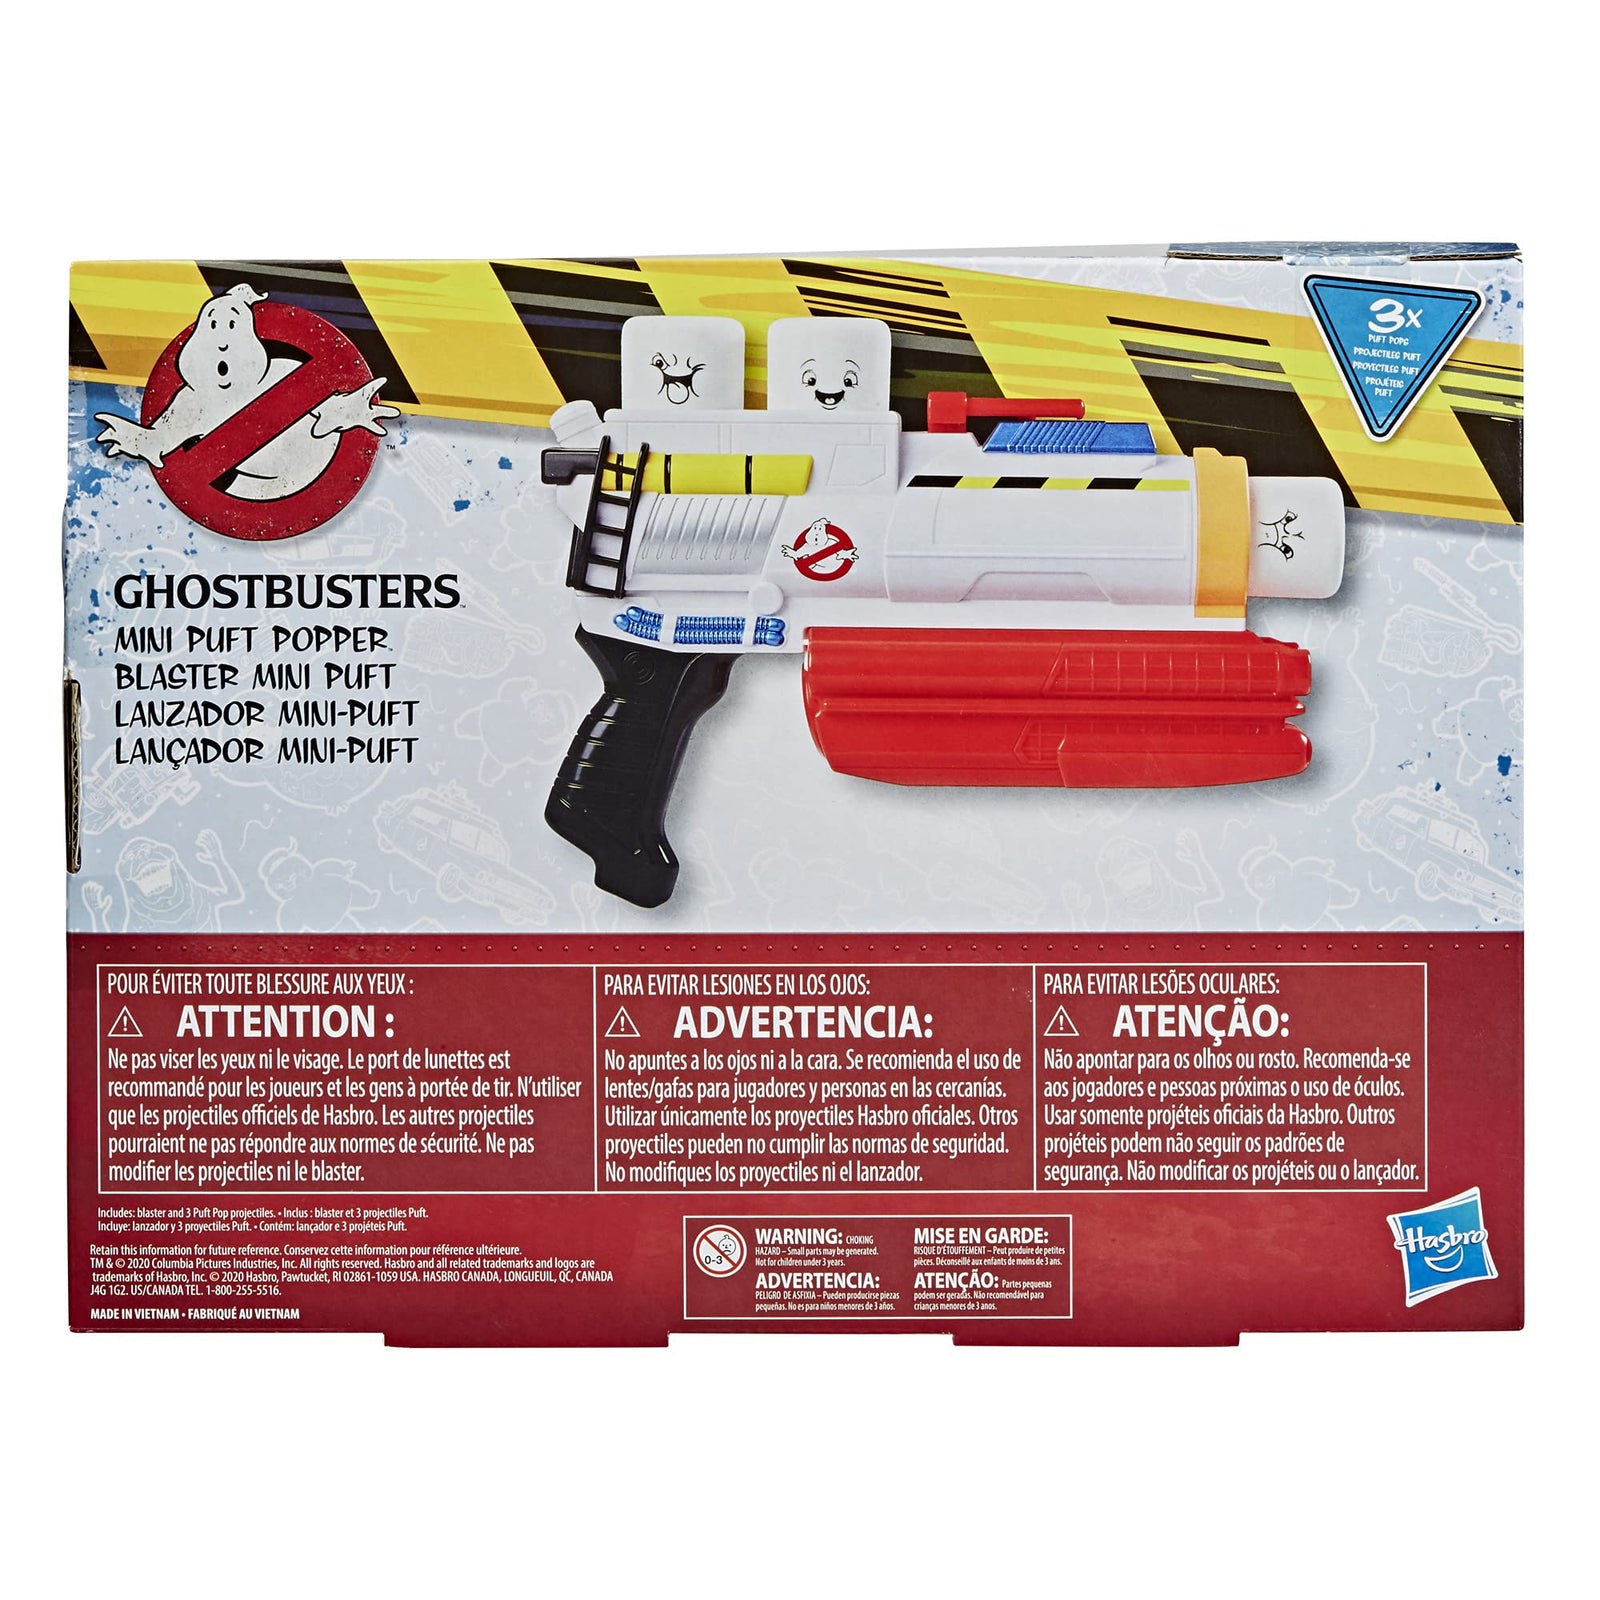 Hasbro Ghostbusters Mini-Puft Popper Blaster Action Ghostbusters: Afterlife Roleplay Toy with 3 Foam Puft Popper Projectiles for Kids Ages 8 and Up